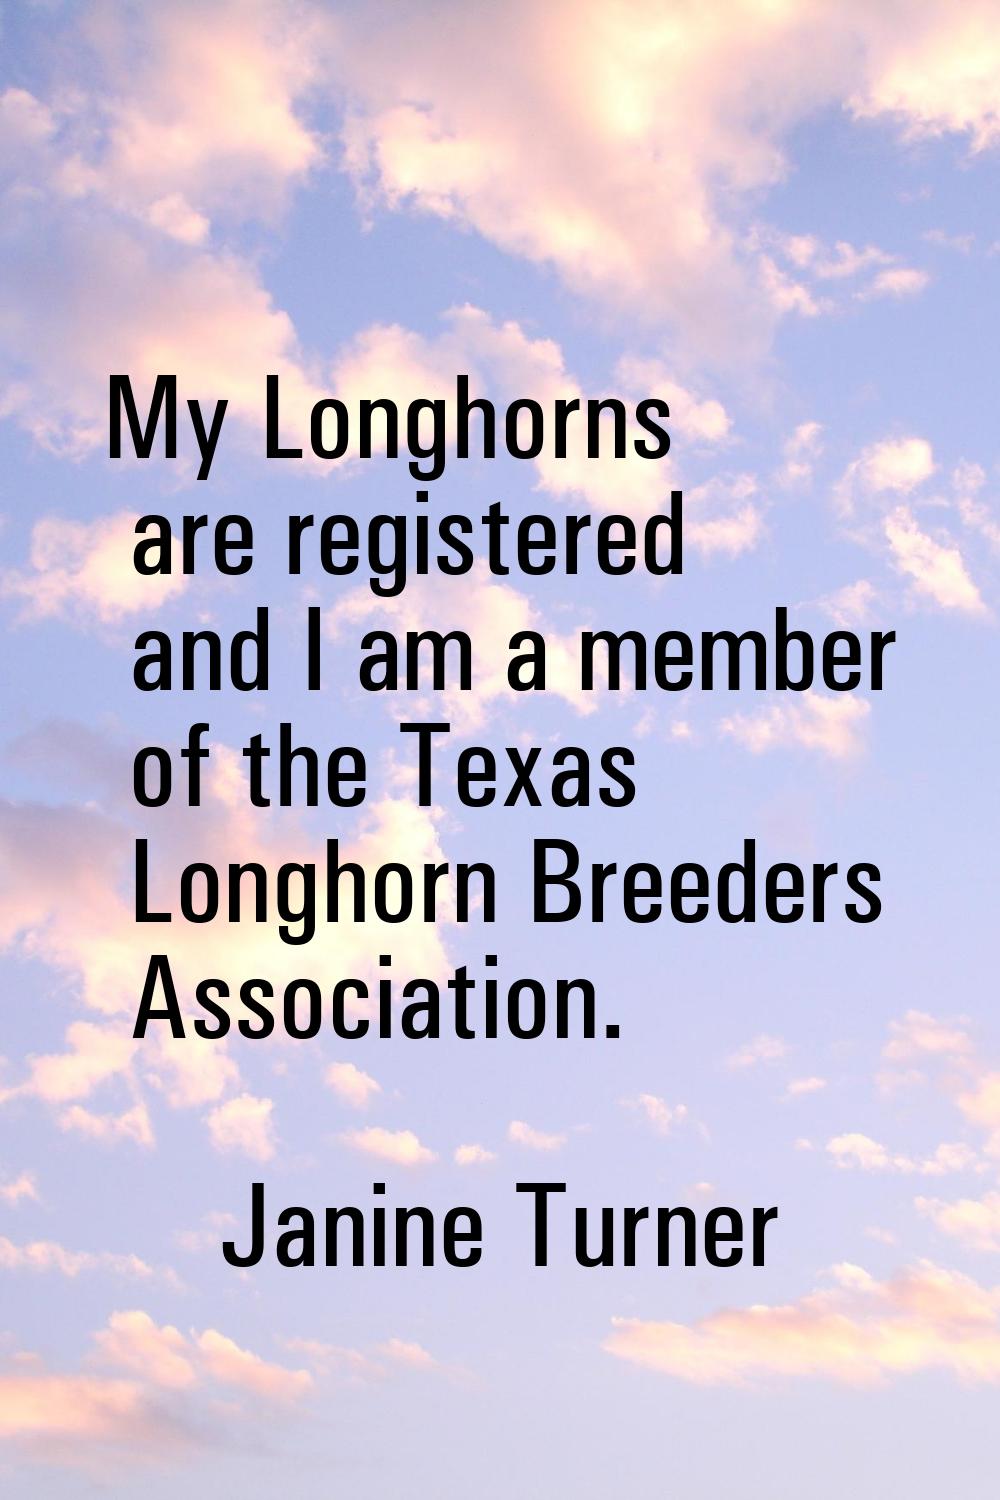 My Longhorns are registered and I am a member of the Texas Longhorn Breeders Association.